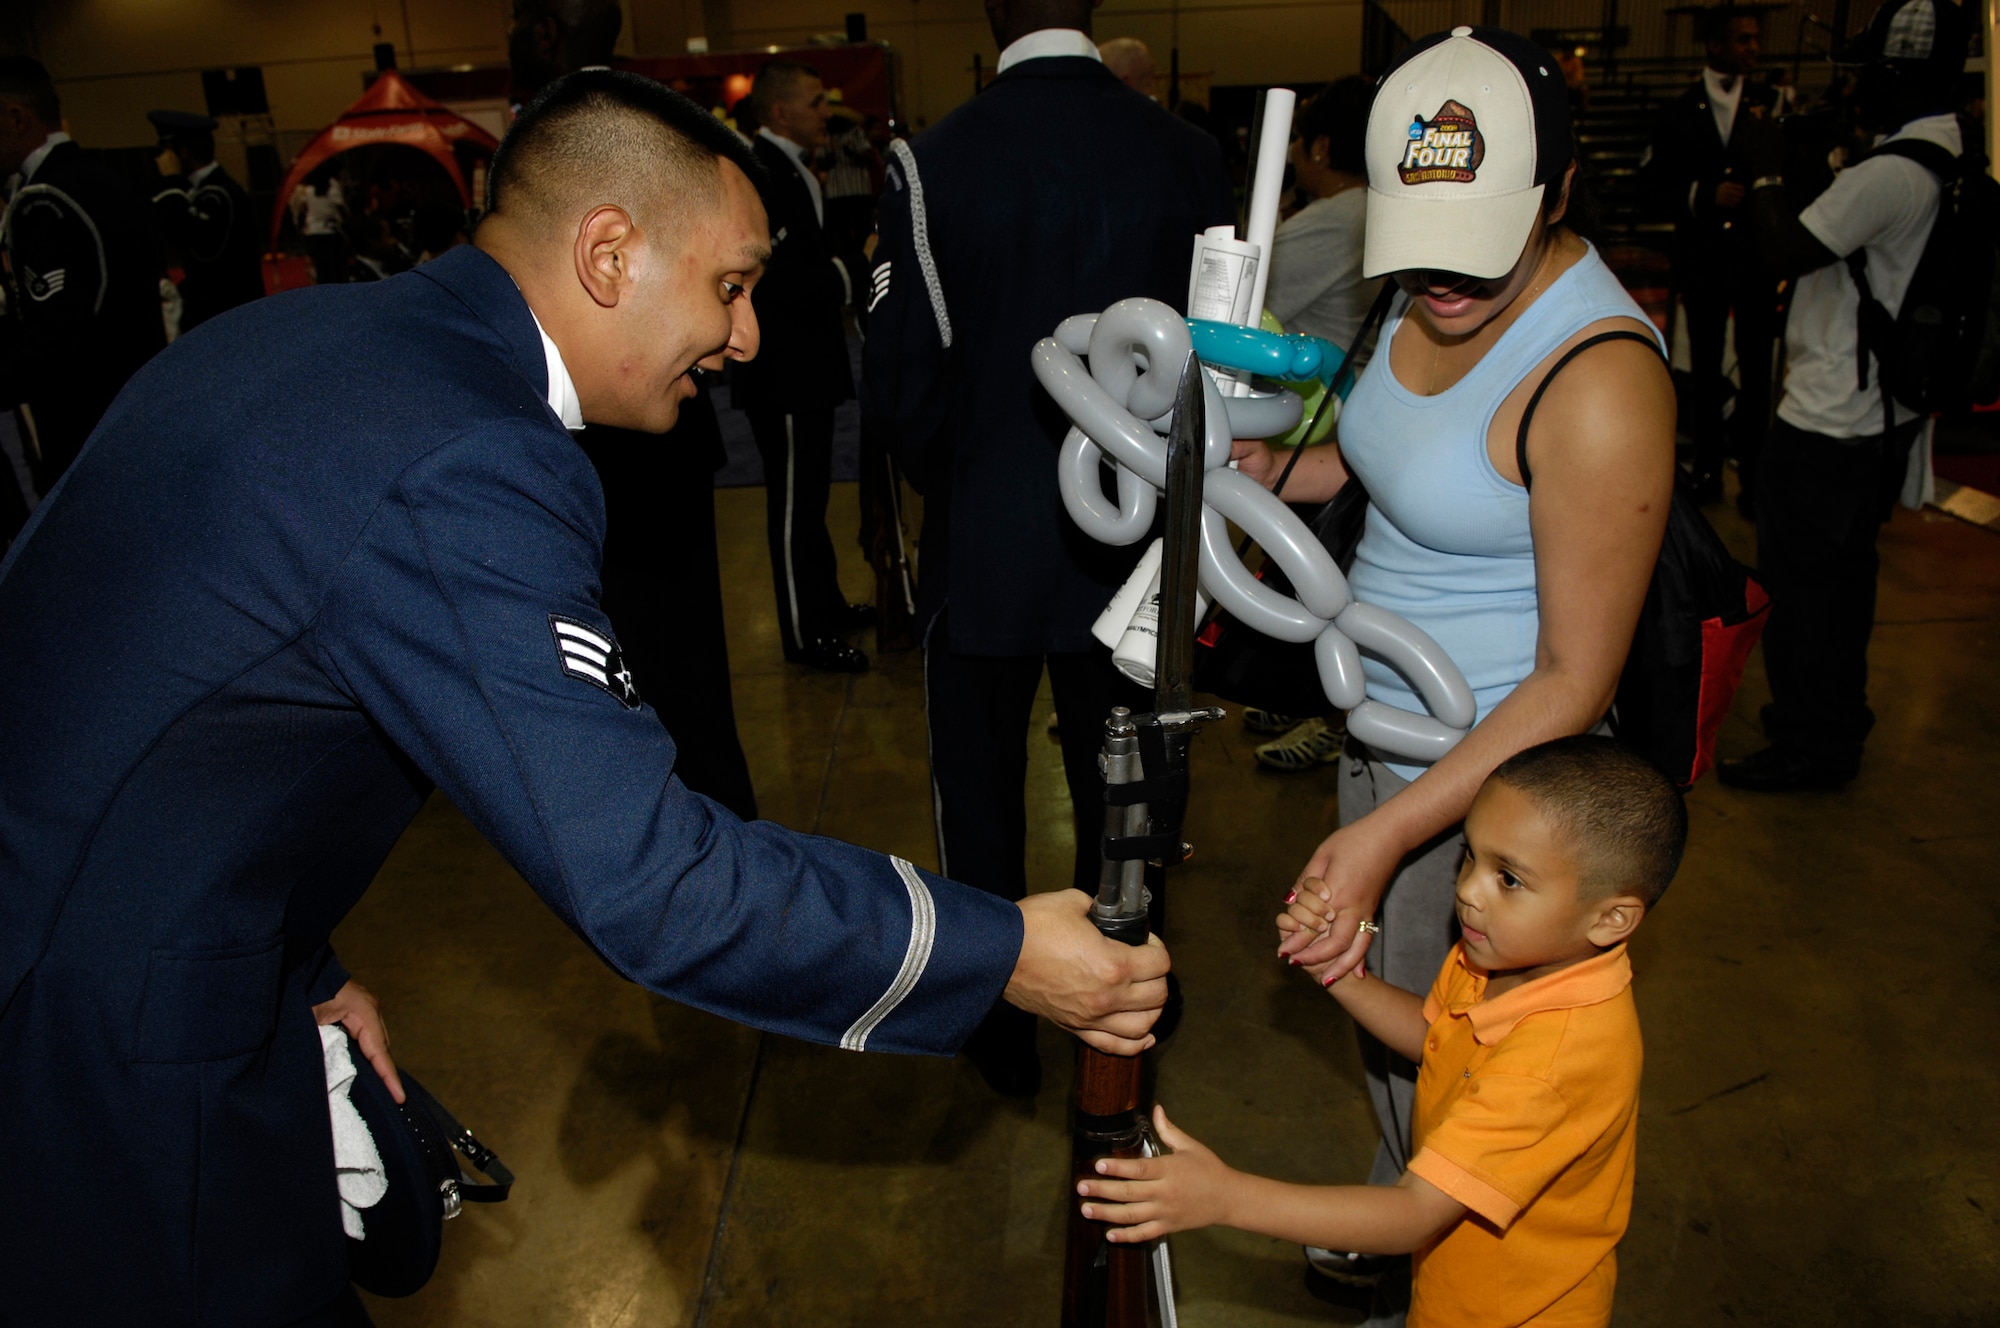 Senior Airman David Perry, USAF Honor Guard Drill Team member, interacts with a young NCAA college basketball fan following the Drill Team's performance at Hoop City. The Drill Team is the travelling component of the Air Force Honor Guard and tours worldwide showcasing the precision of today's Air Force, to recruit, retain and inspire Airmen for the Air Force mission. (U.S. Air Force photo by SSgt Raymond Mills)